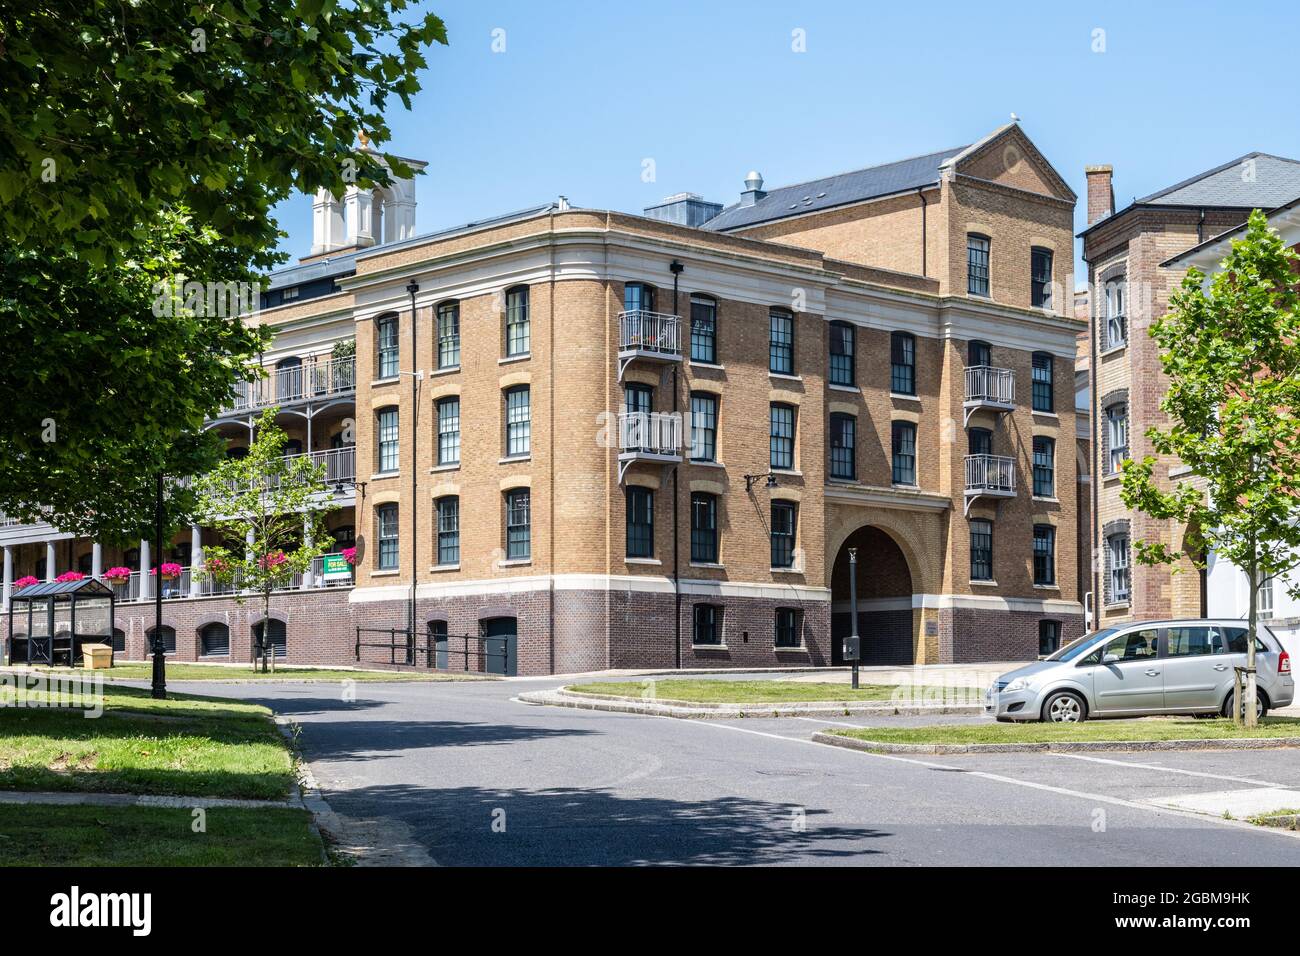 Bowes Lyon Court, a new build retirement apartment building taking inspiration from the architecture of Victorian warehouses and mills, in Poundbury n Stock Photo